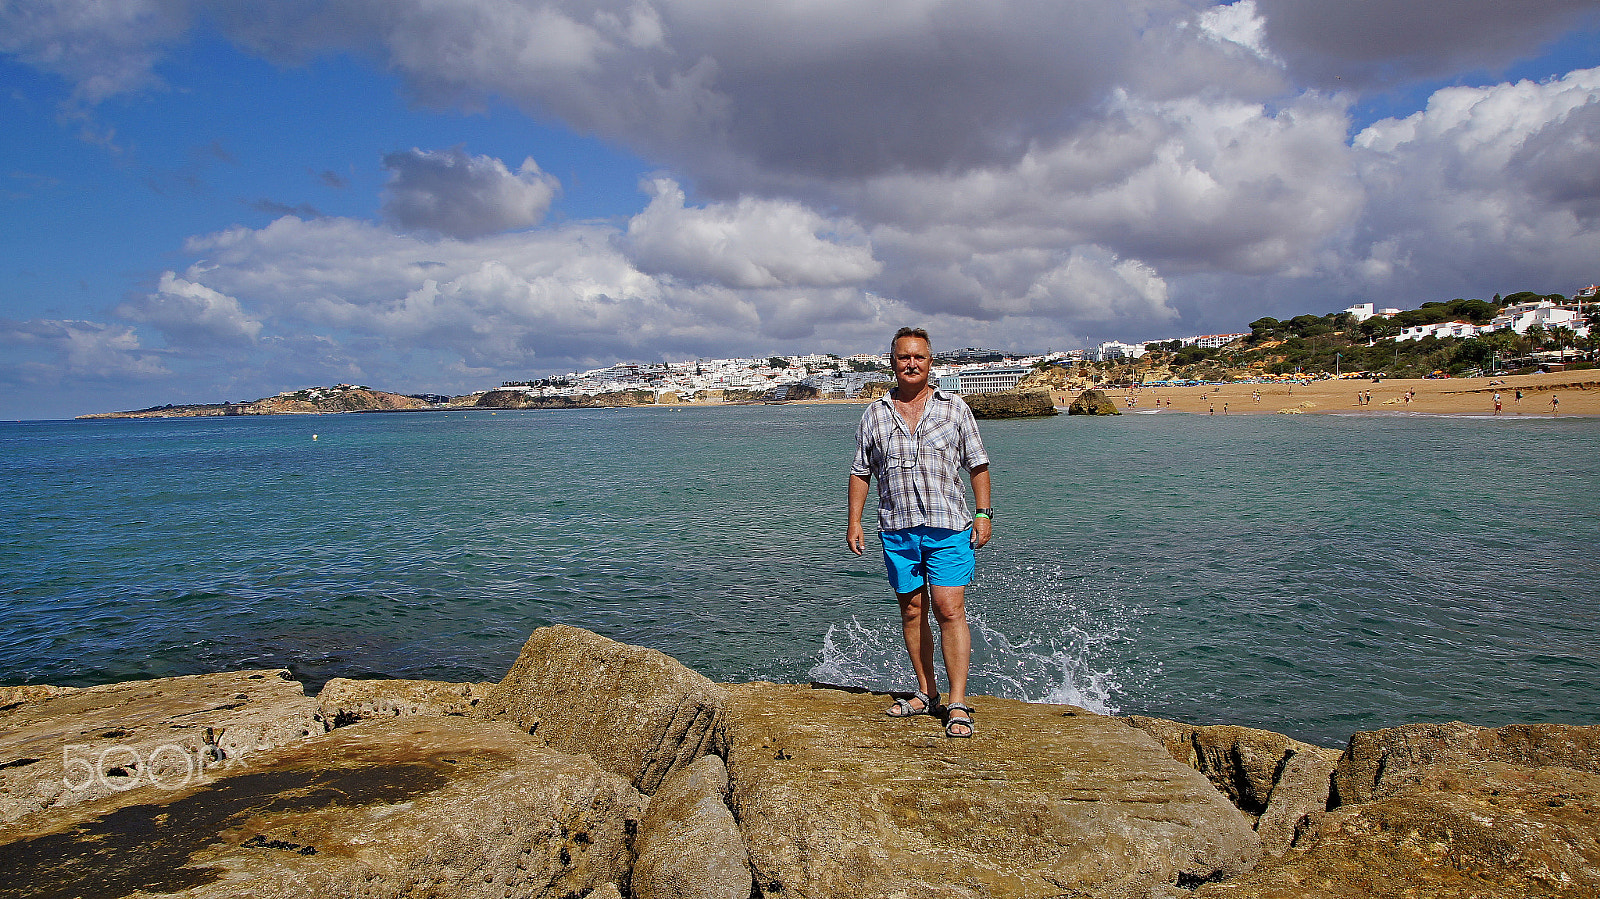 Sony SLT-A55 (SLT-A55V) + Tamron SP AF 17-50mm F2.8 XR Di II LD Aspherical (IF) sample photo. Sony dsc farewell to albufeira. self-portrait. photography